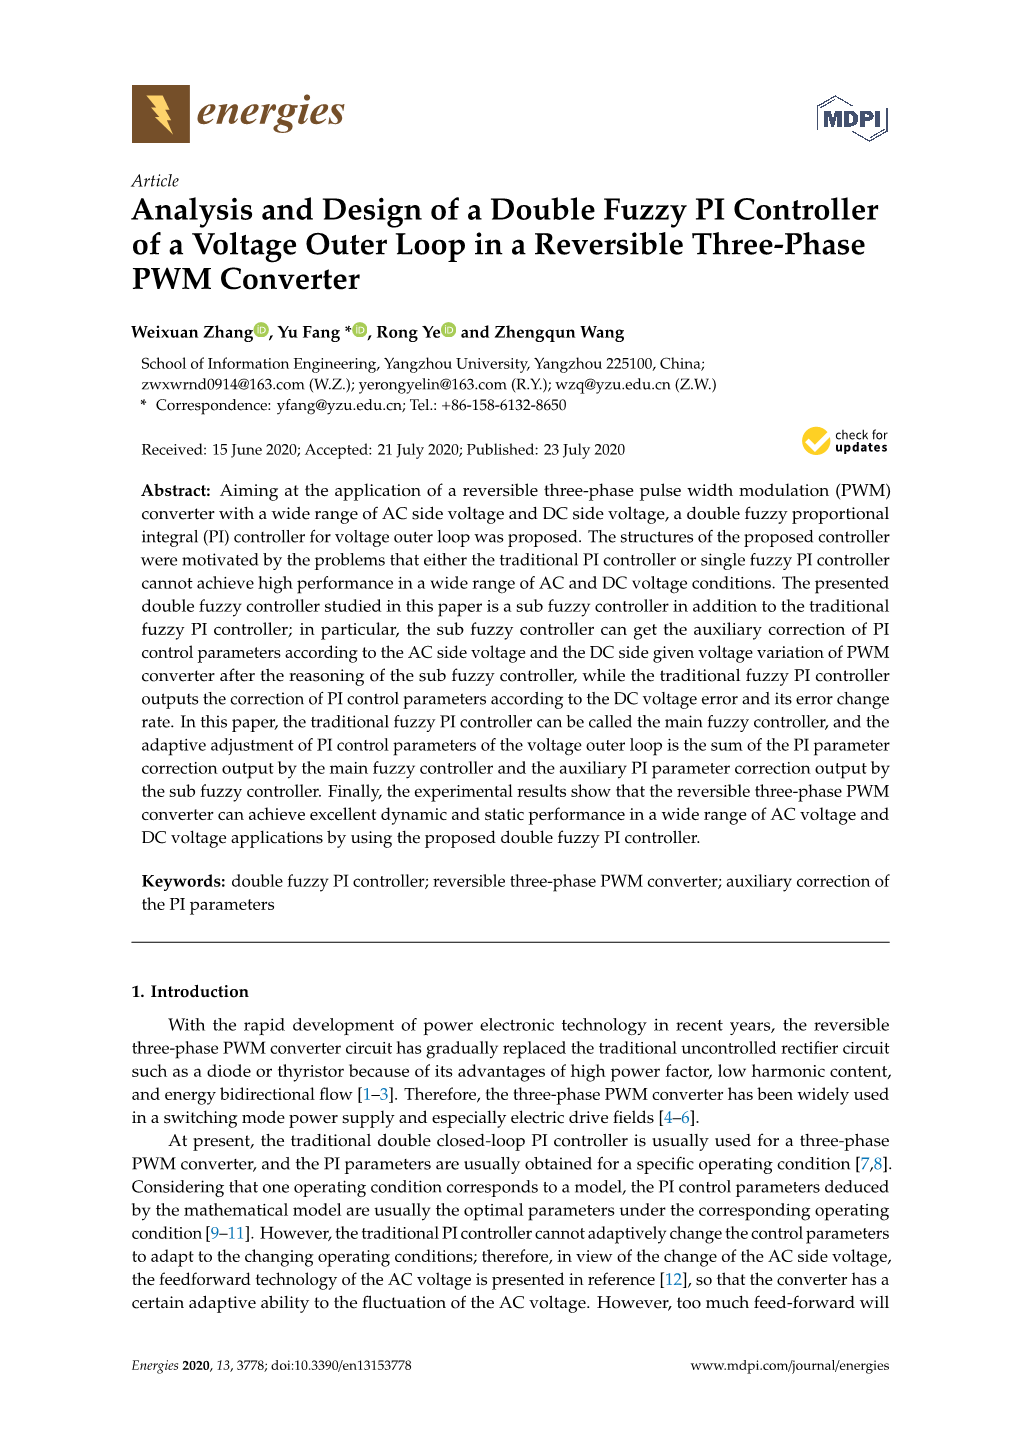 Analysis and Design of a Double Fuzzy PI Controller of a Voltage Outer Loop in a Reversible Three-Phase PWM Converter